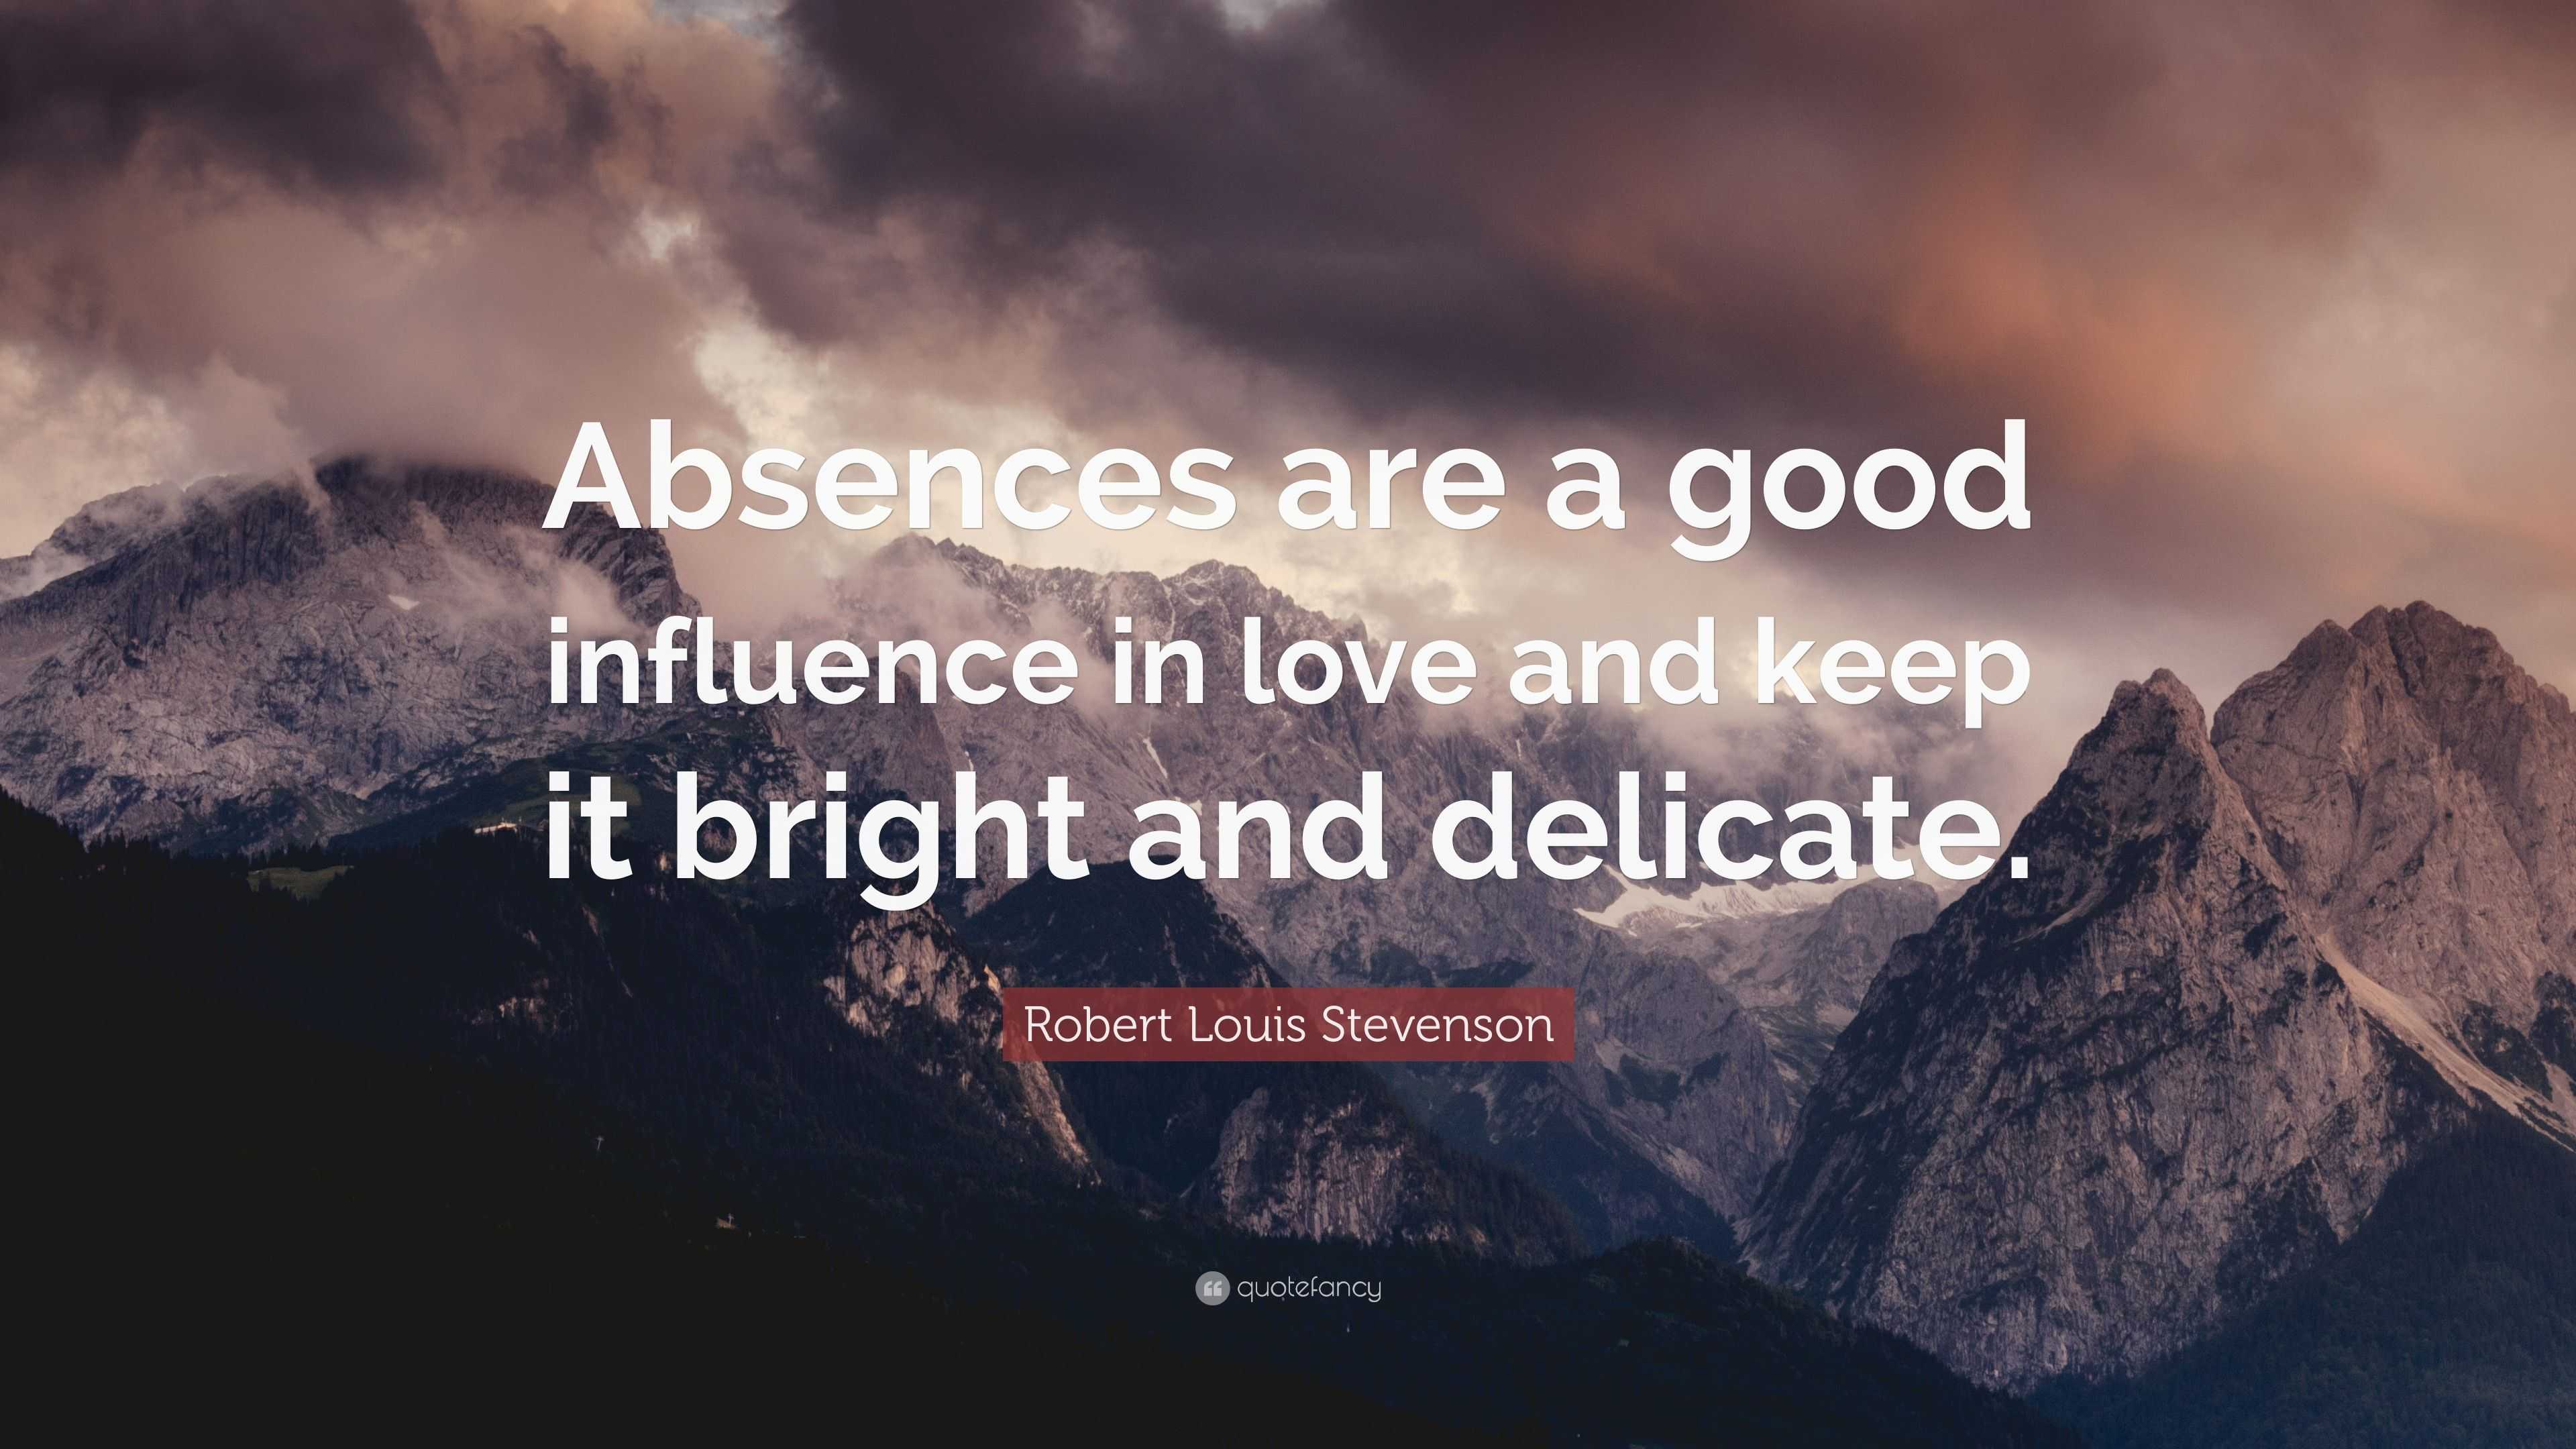 Robert Louis Stevenson Quote: “Absences are a good influence in love and keep it bright and ...